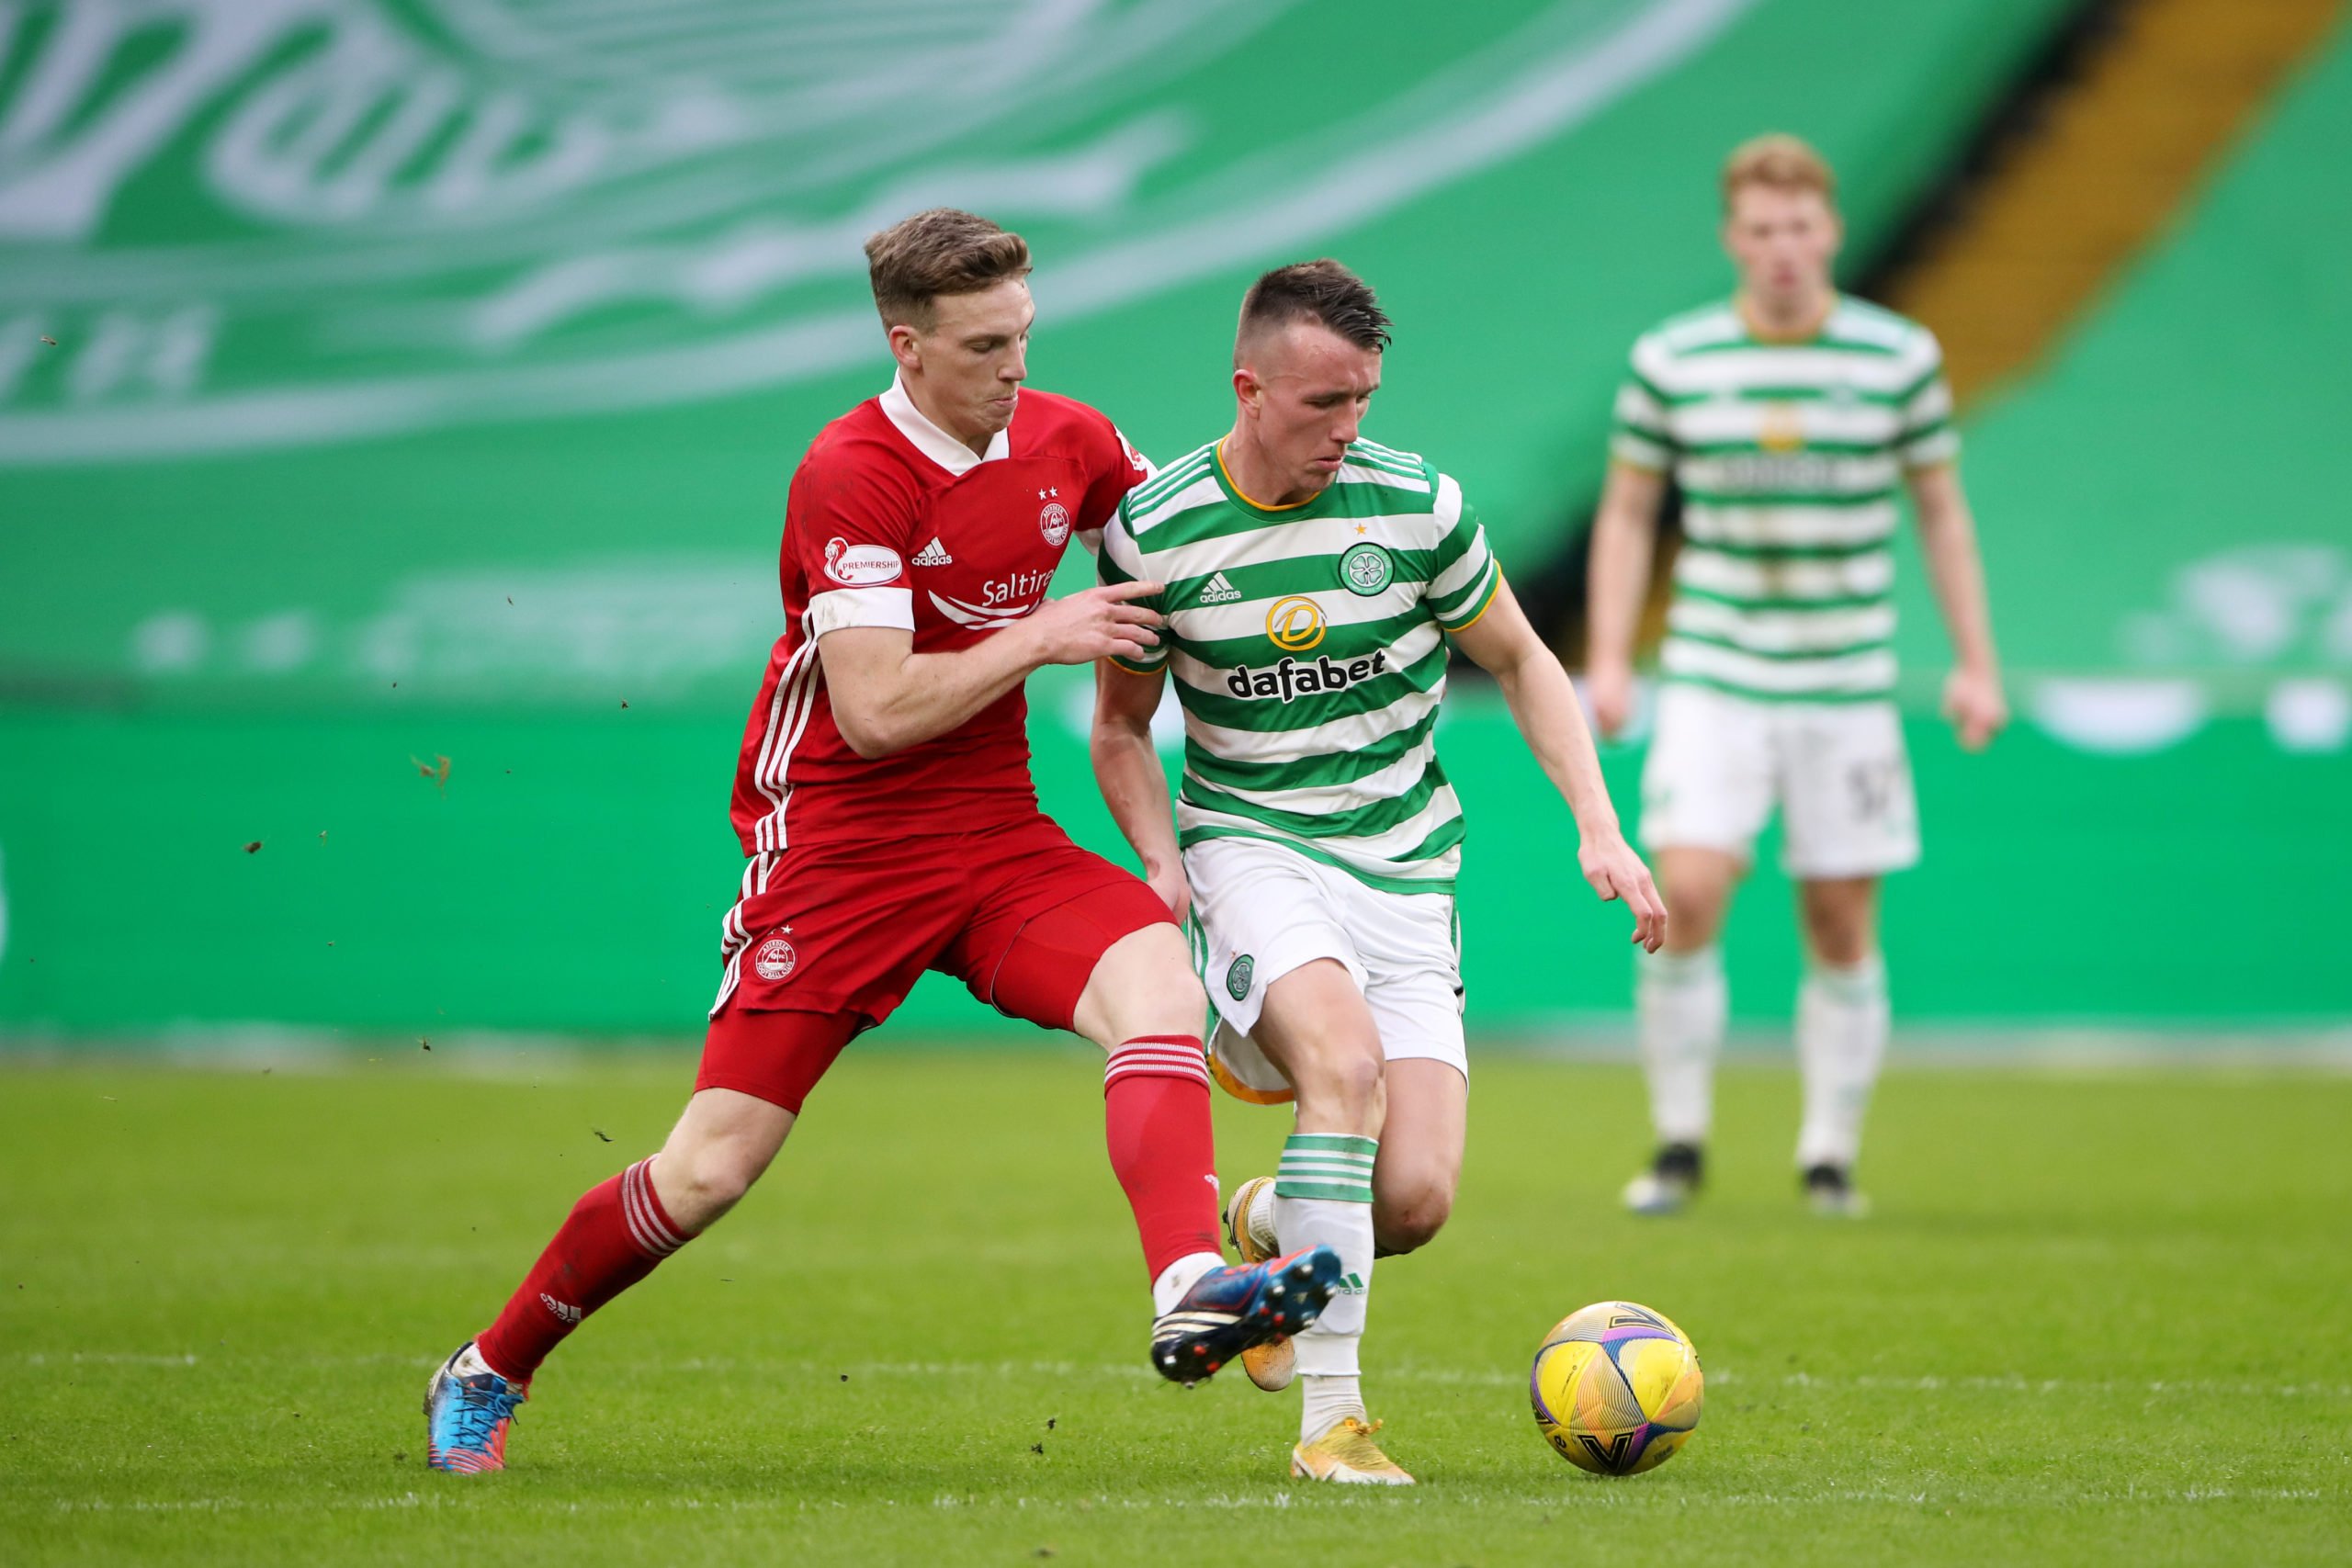 Celtic's Top 10 key passers so far this season; two players streaking ahead